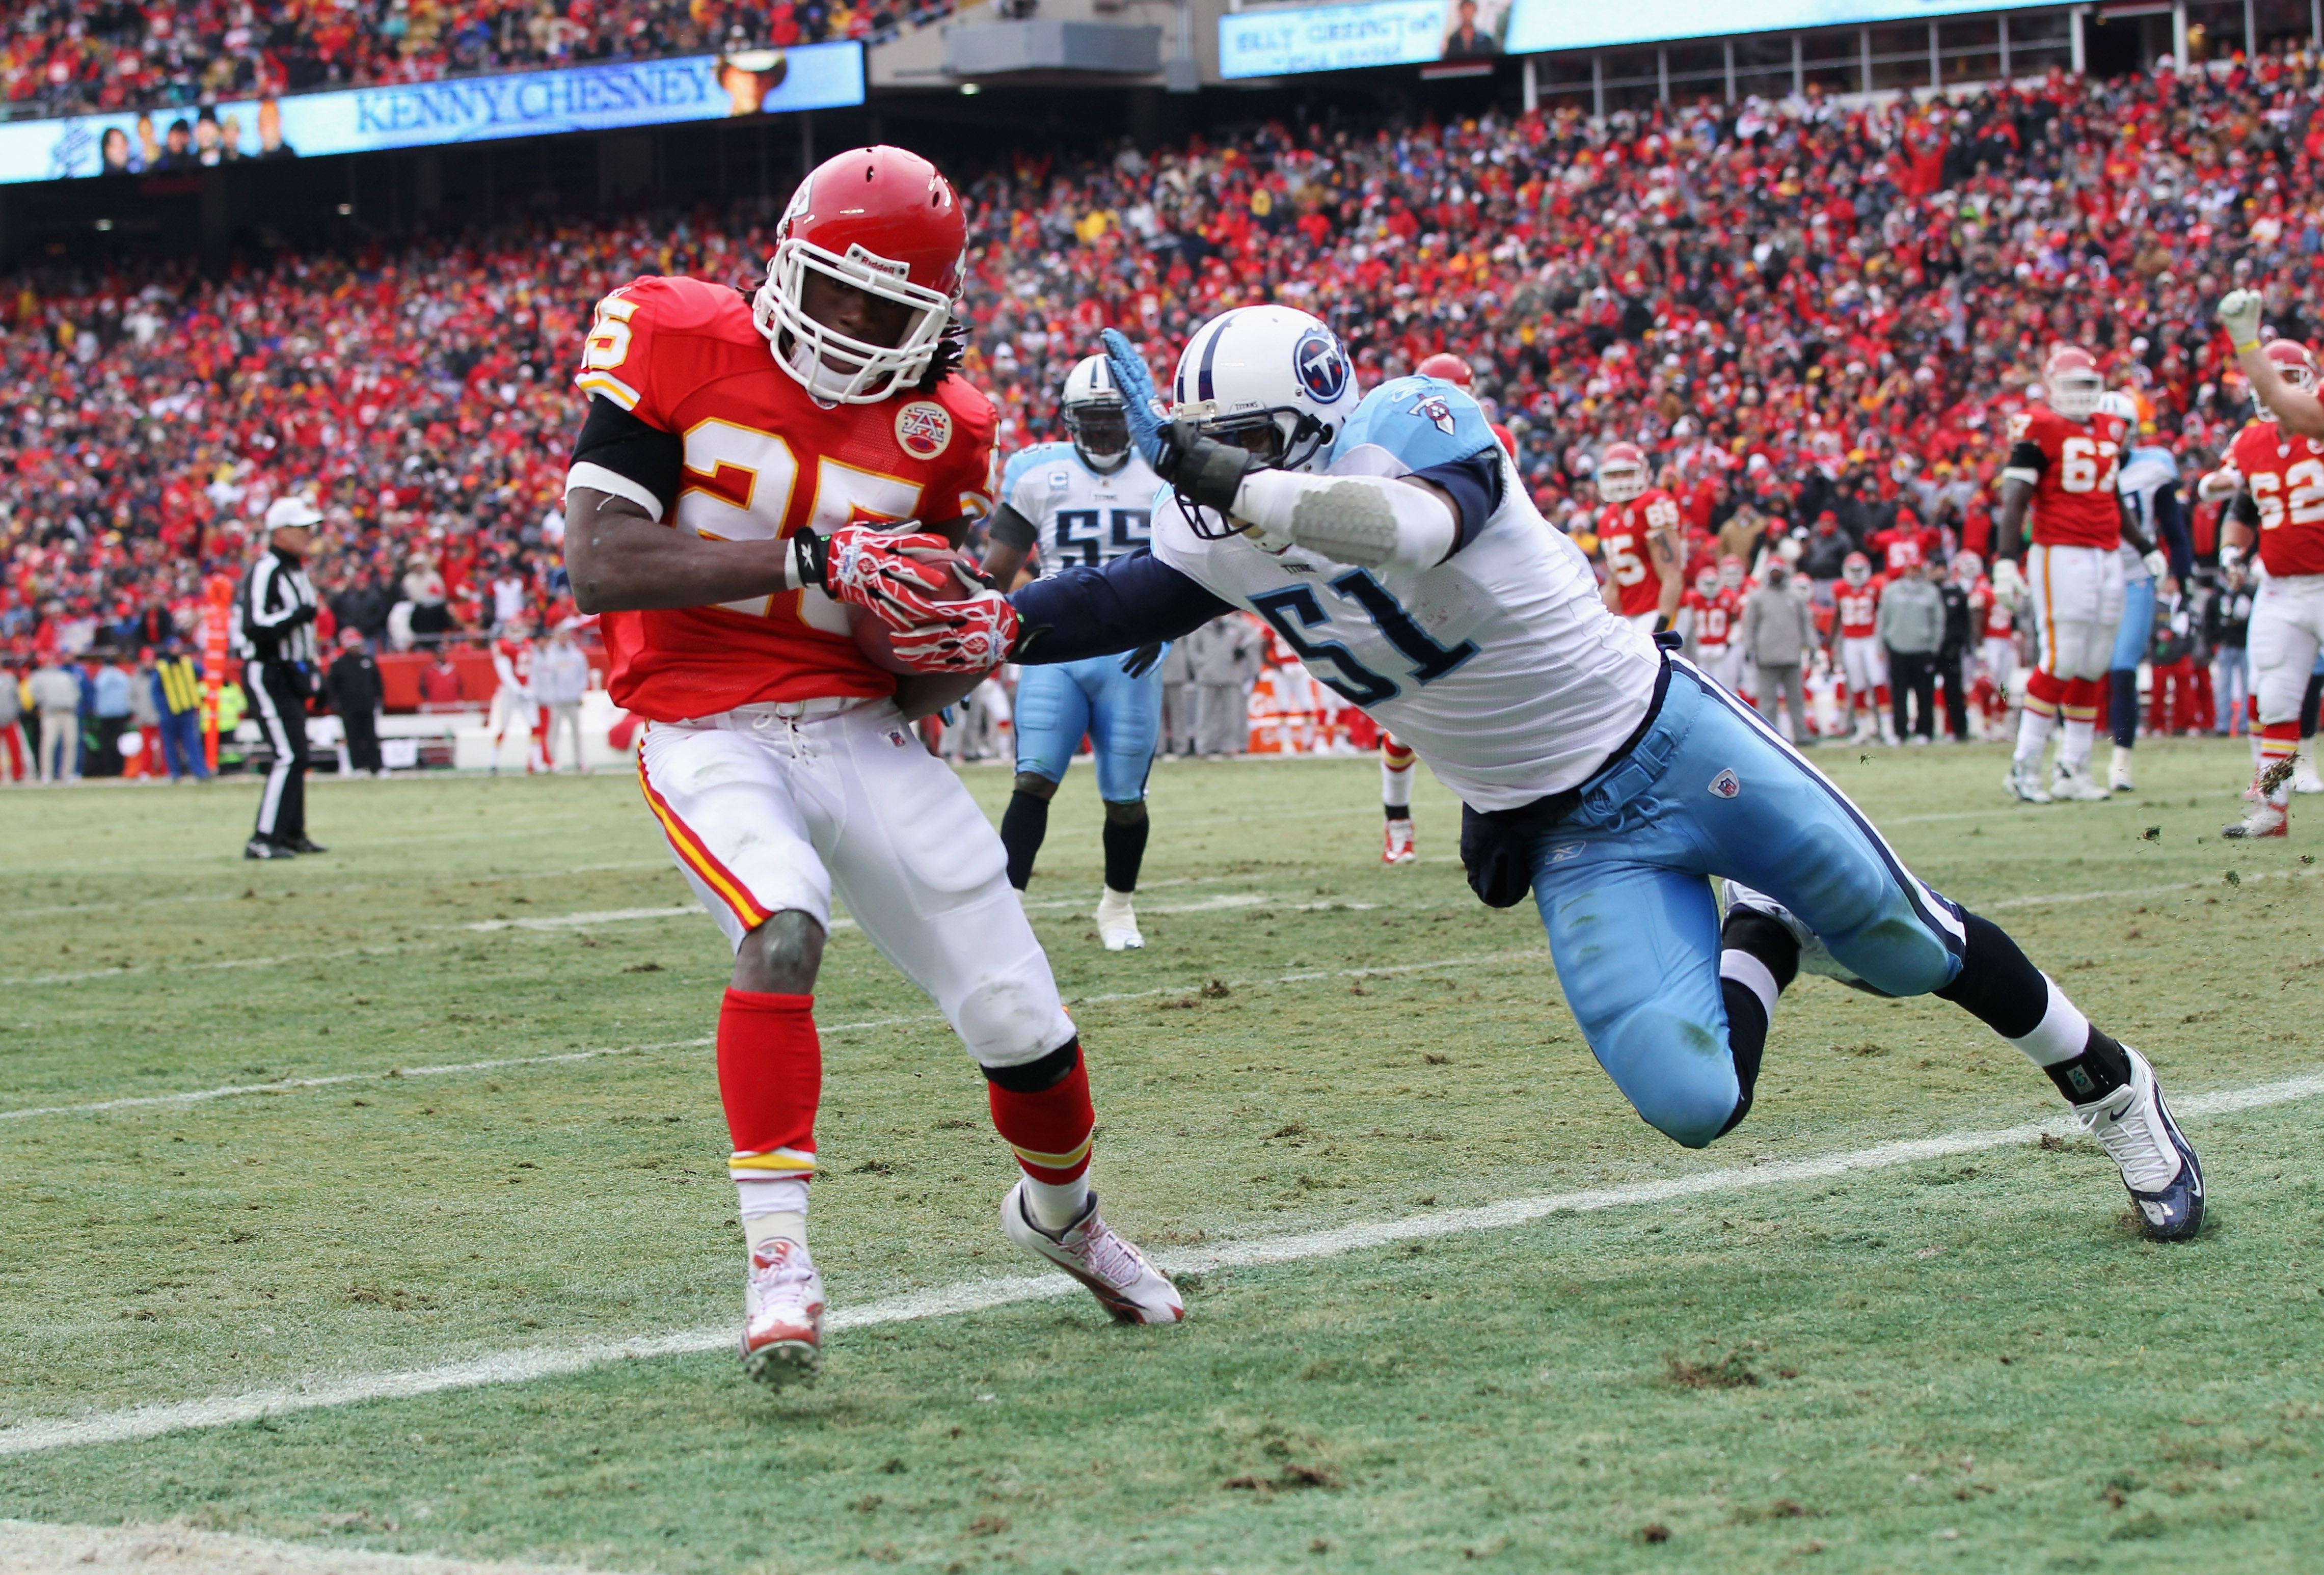 KANSAS CITY, MO - DECEMBER 26:  Jamaal Charles #25 of the Kansas City Chiefs makes a catch in the endzone for a touchdown as Gerald McRath #51 of the Tennessee Titans defends during the game on December 26, 2010 at Arrowhead Stadium in Kansas City, Missou